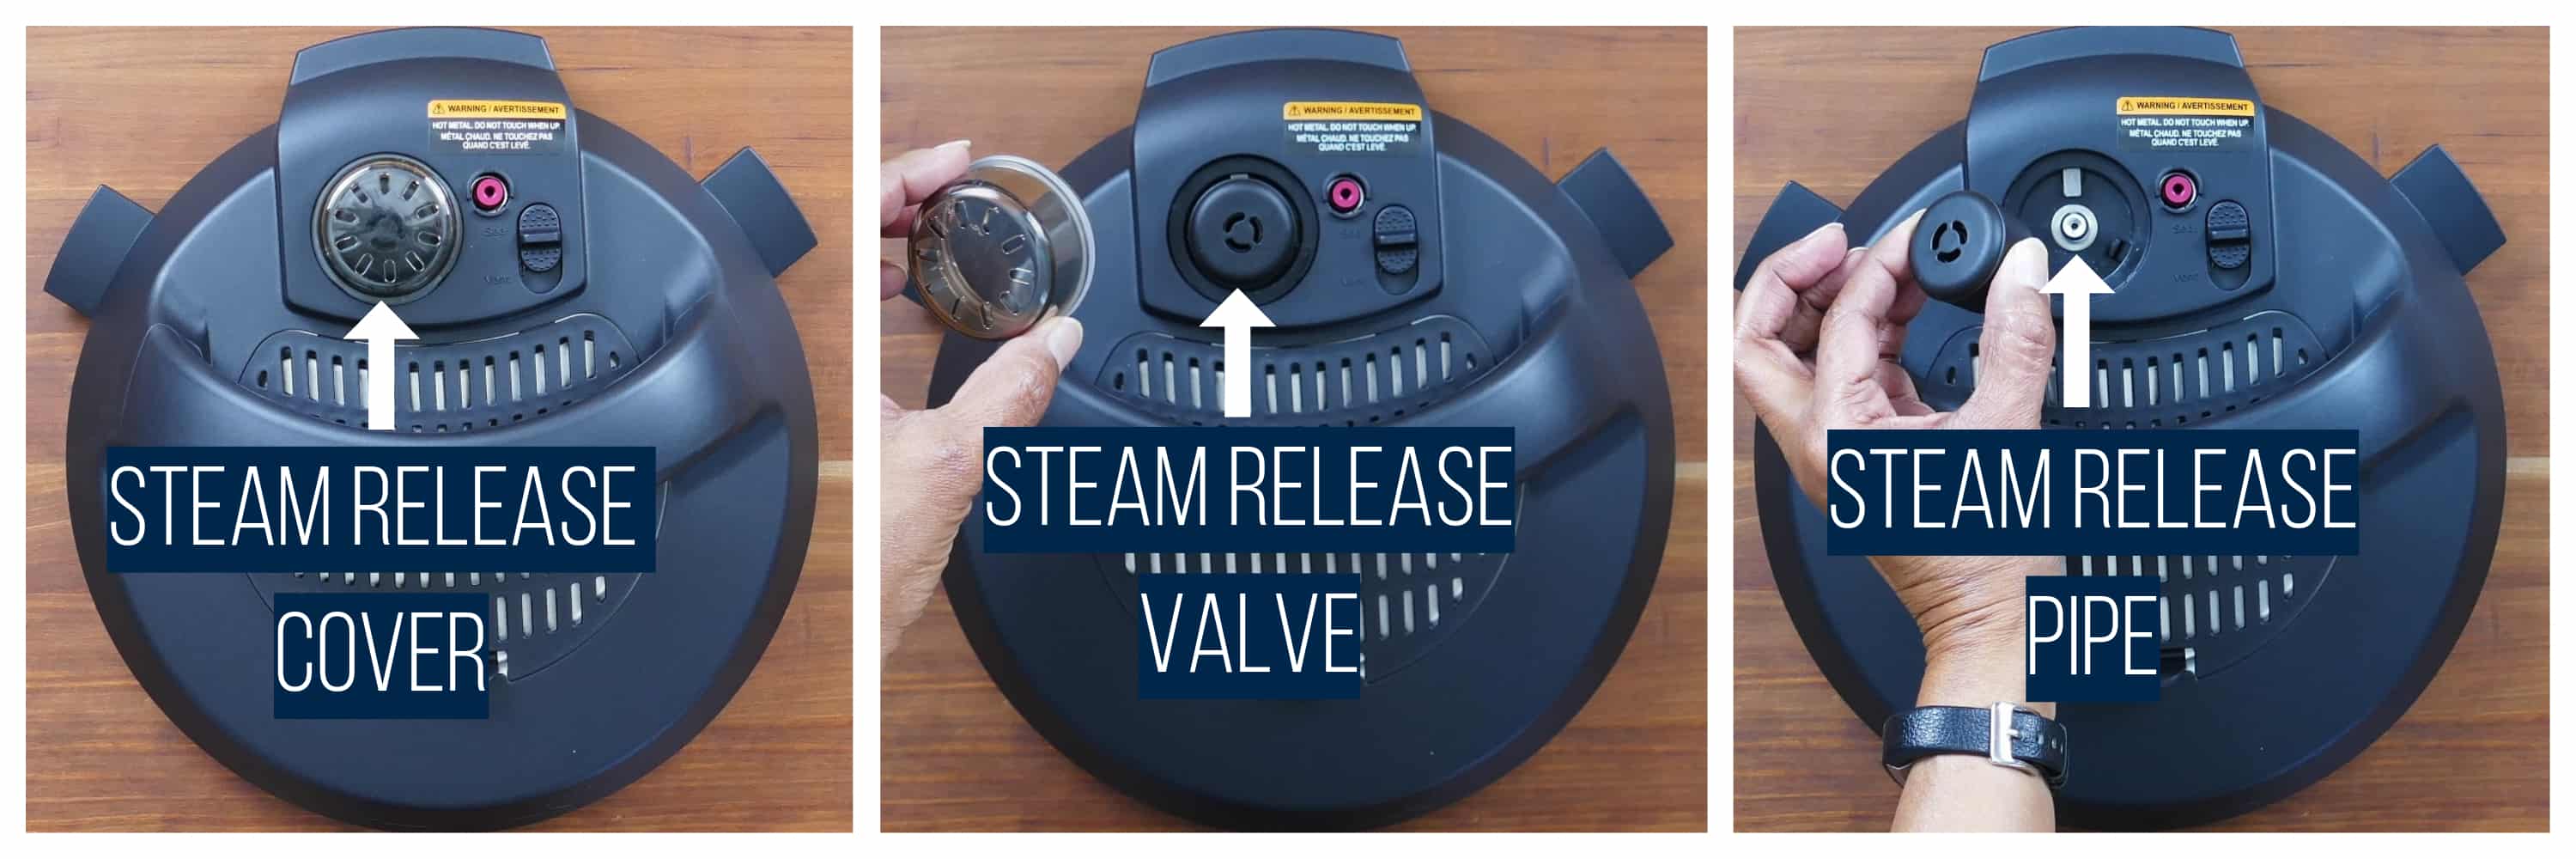 Instant Pot Duo Evo Plus collage - steam release cover, removed, steam release valve, removed, steam release pipe - Paint the Kitchen Red